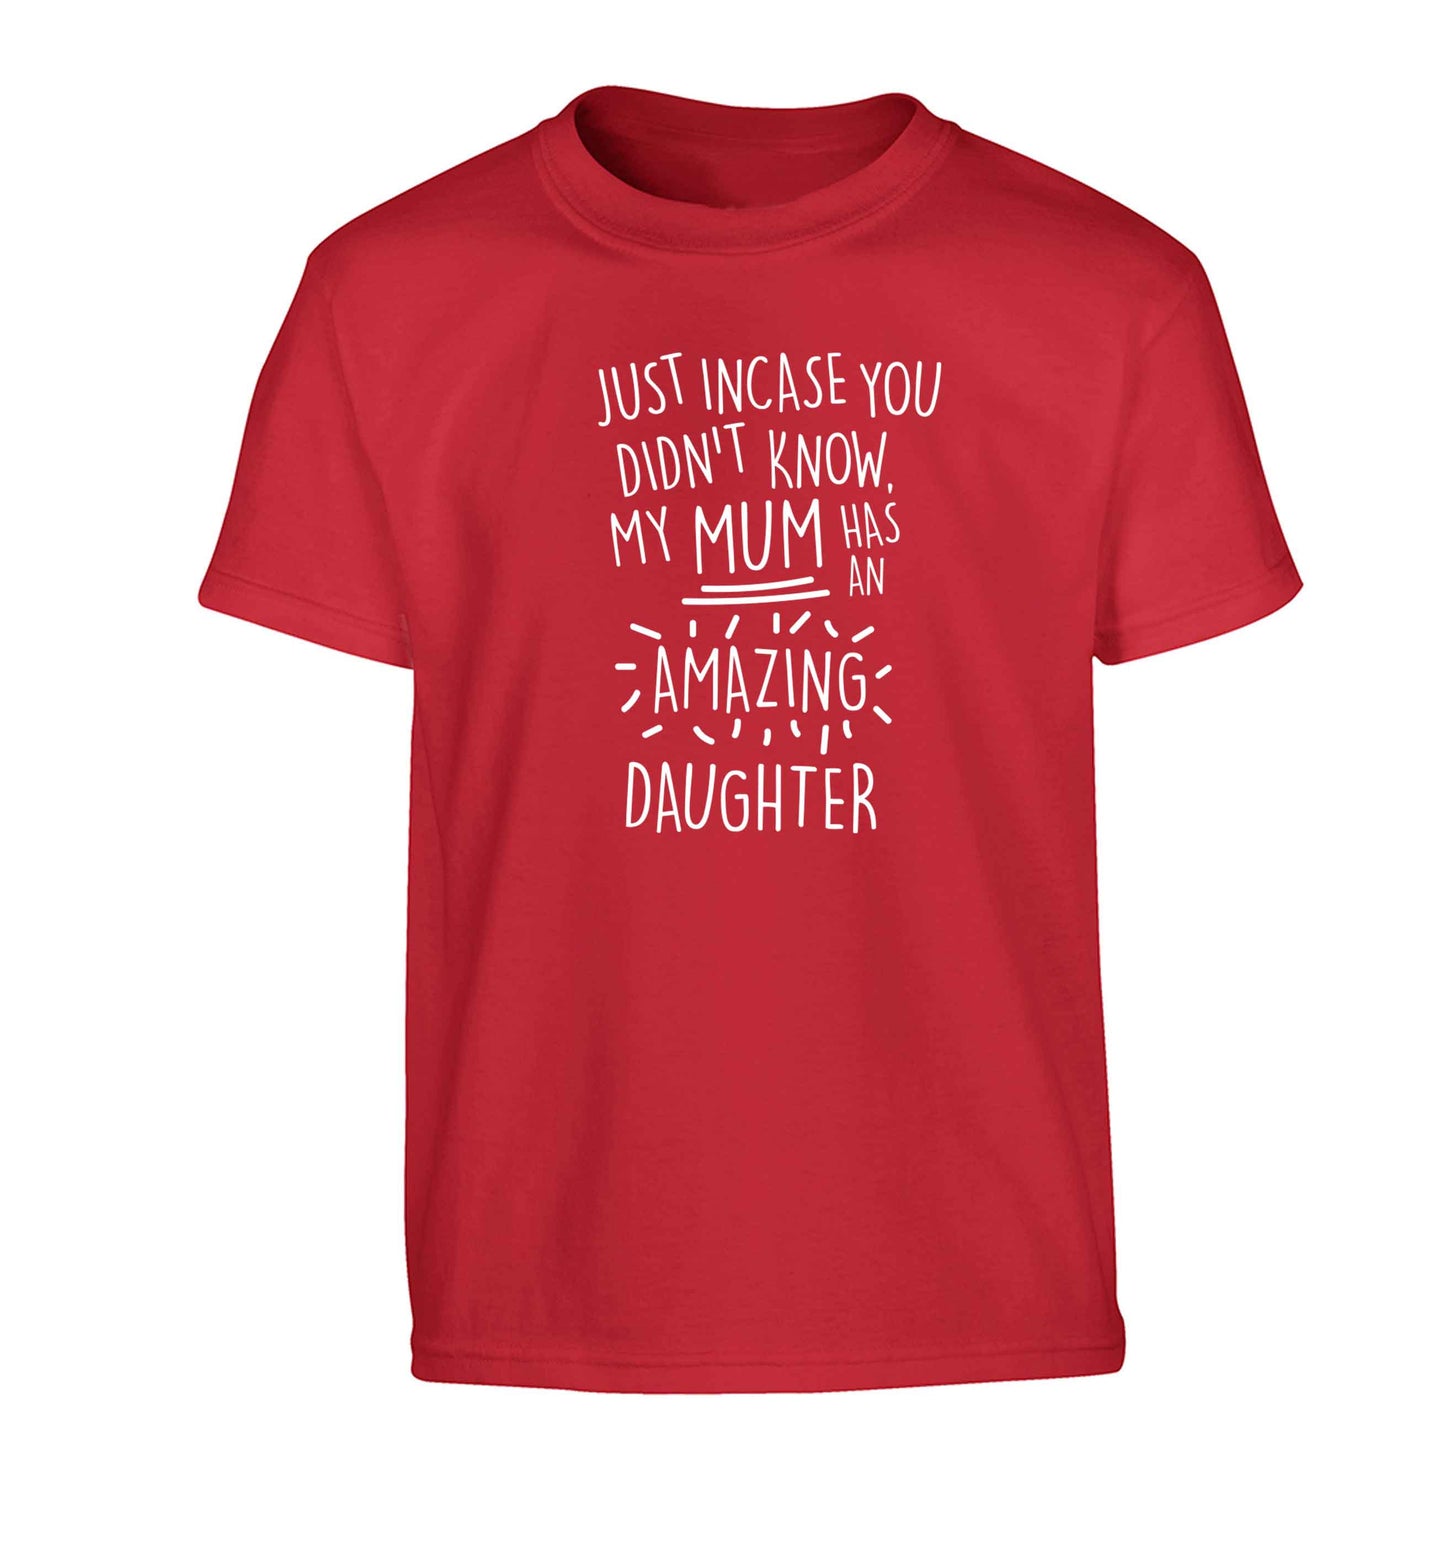 Just incase you didn't know my mum has an amazing daughter Children's red Tshirt 12-13 Years